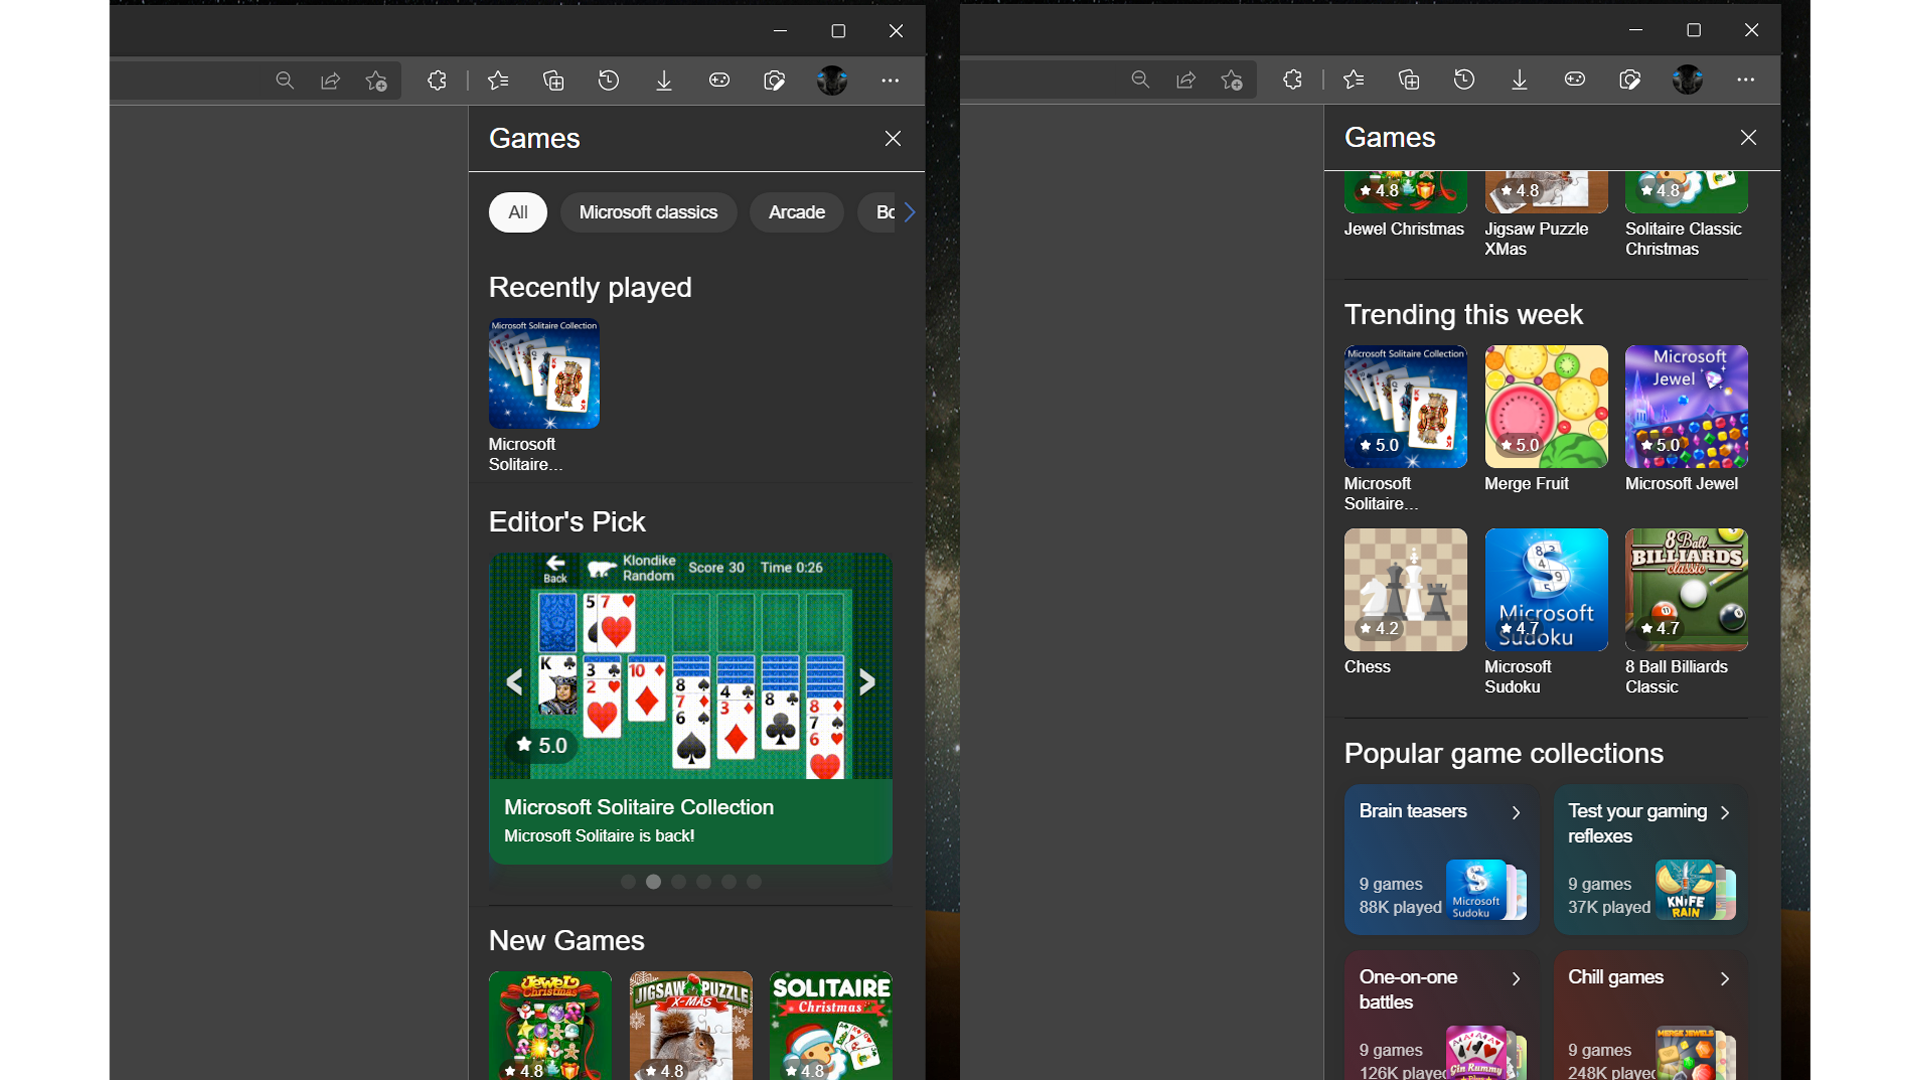 The new Games Panel in Microsoft Edge, featuring Solitaire and Billiards.